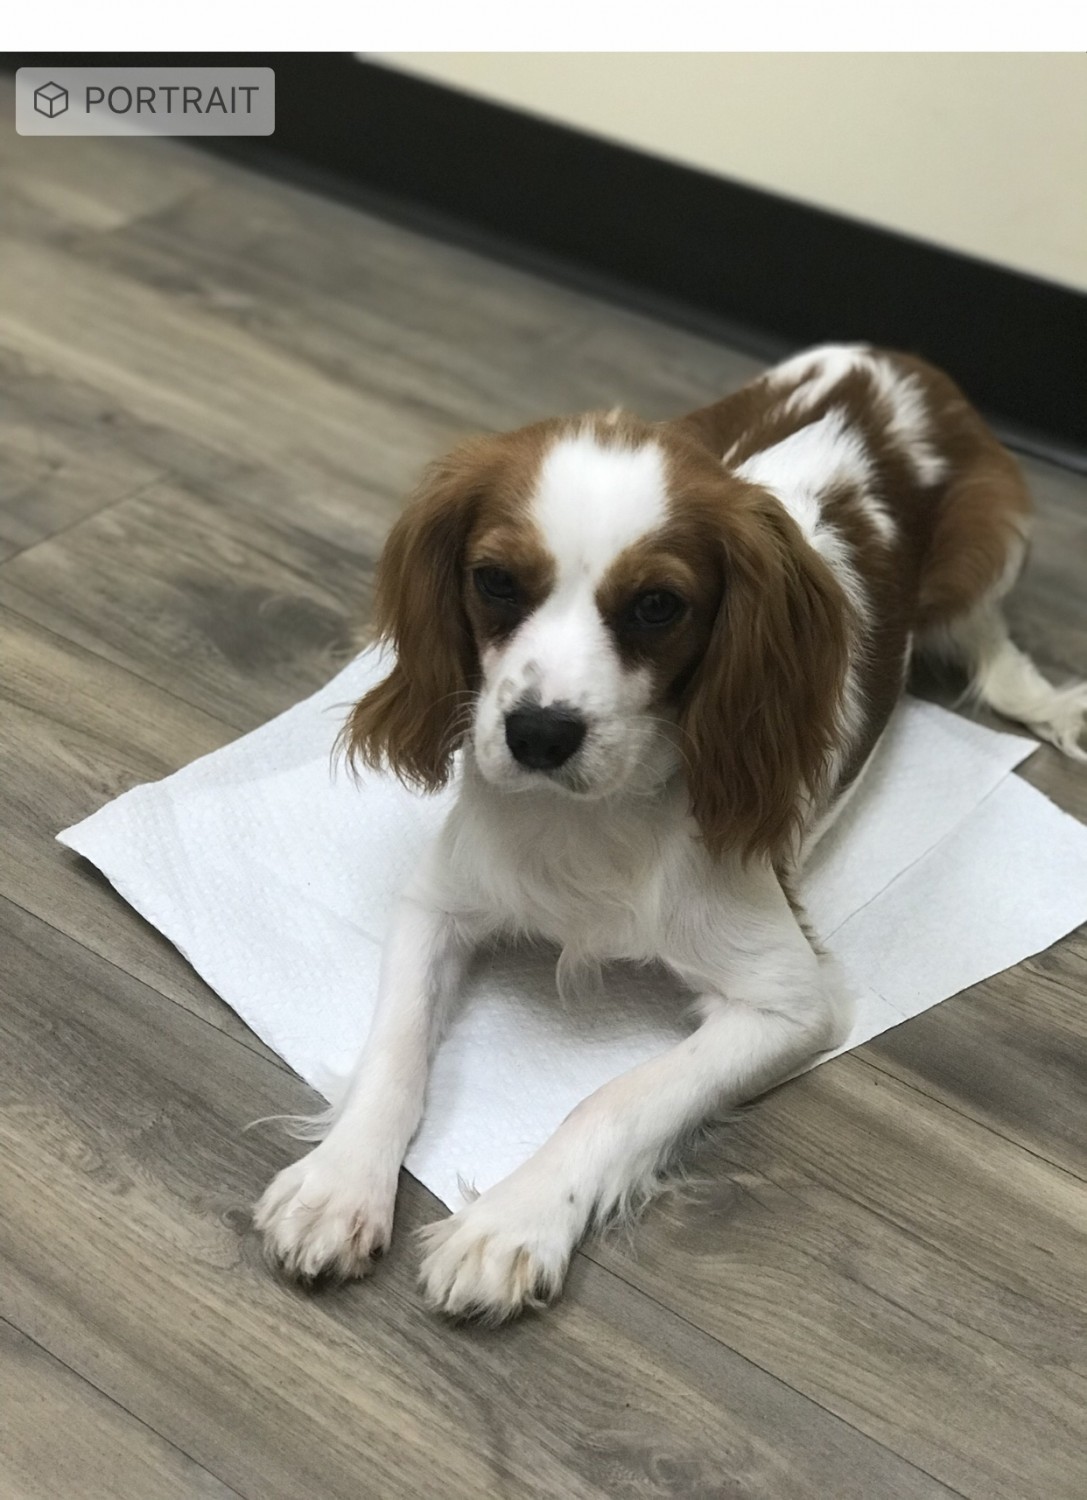 King Charles Spaniel Puppies For Sale Jacksonville, FL